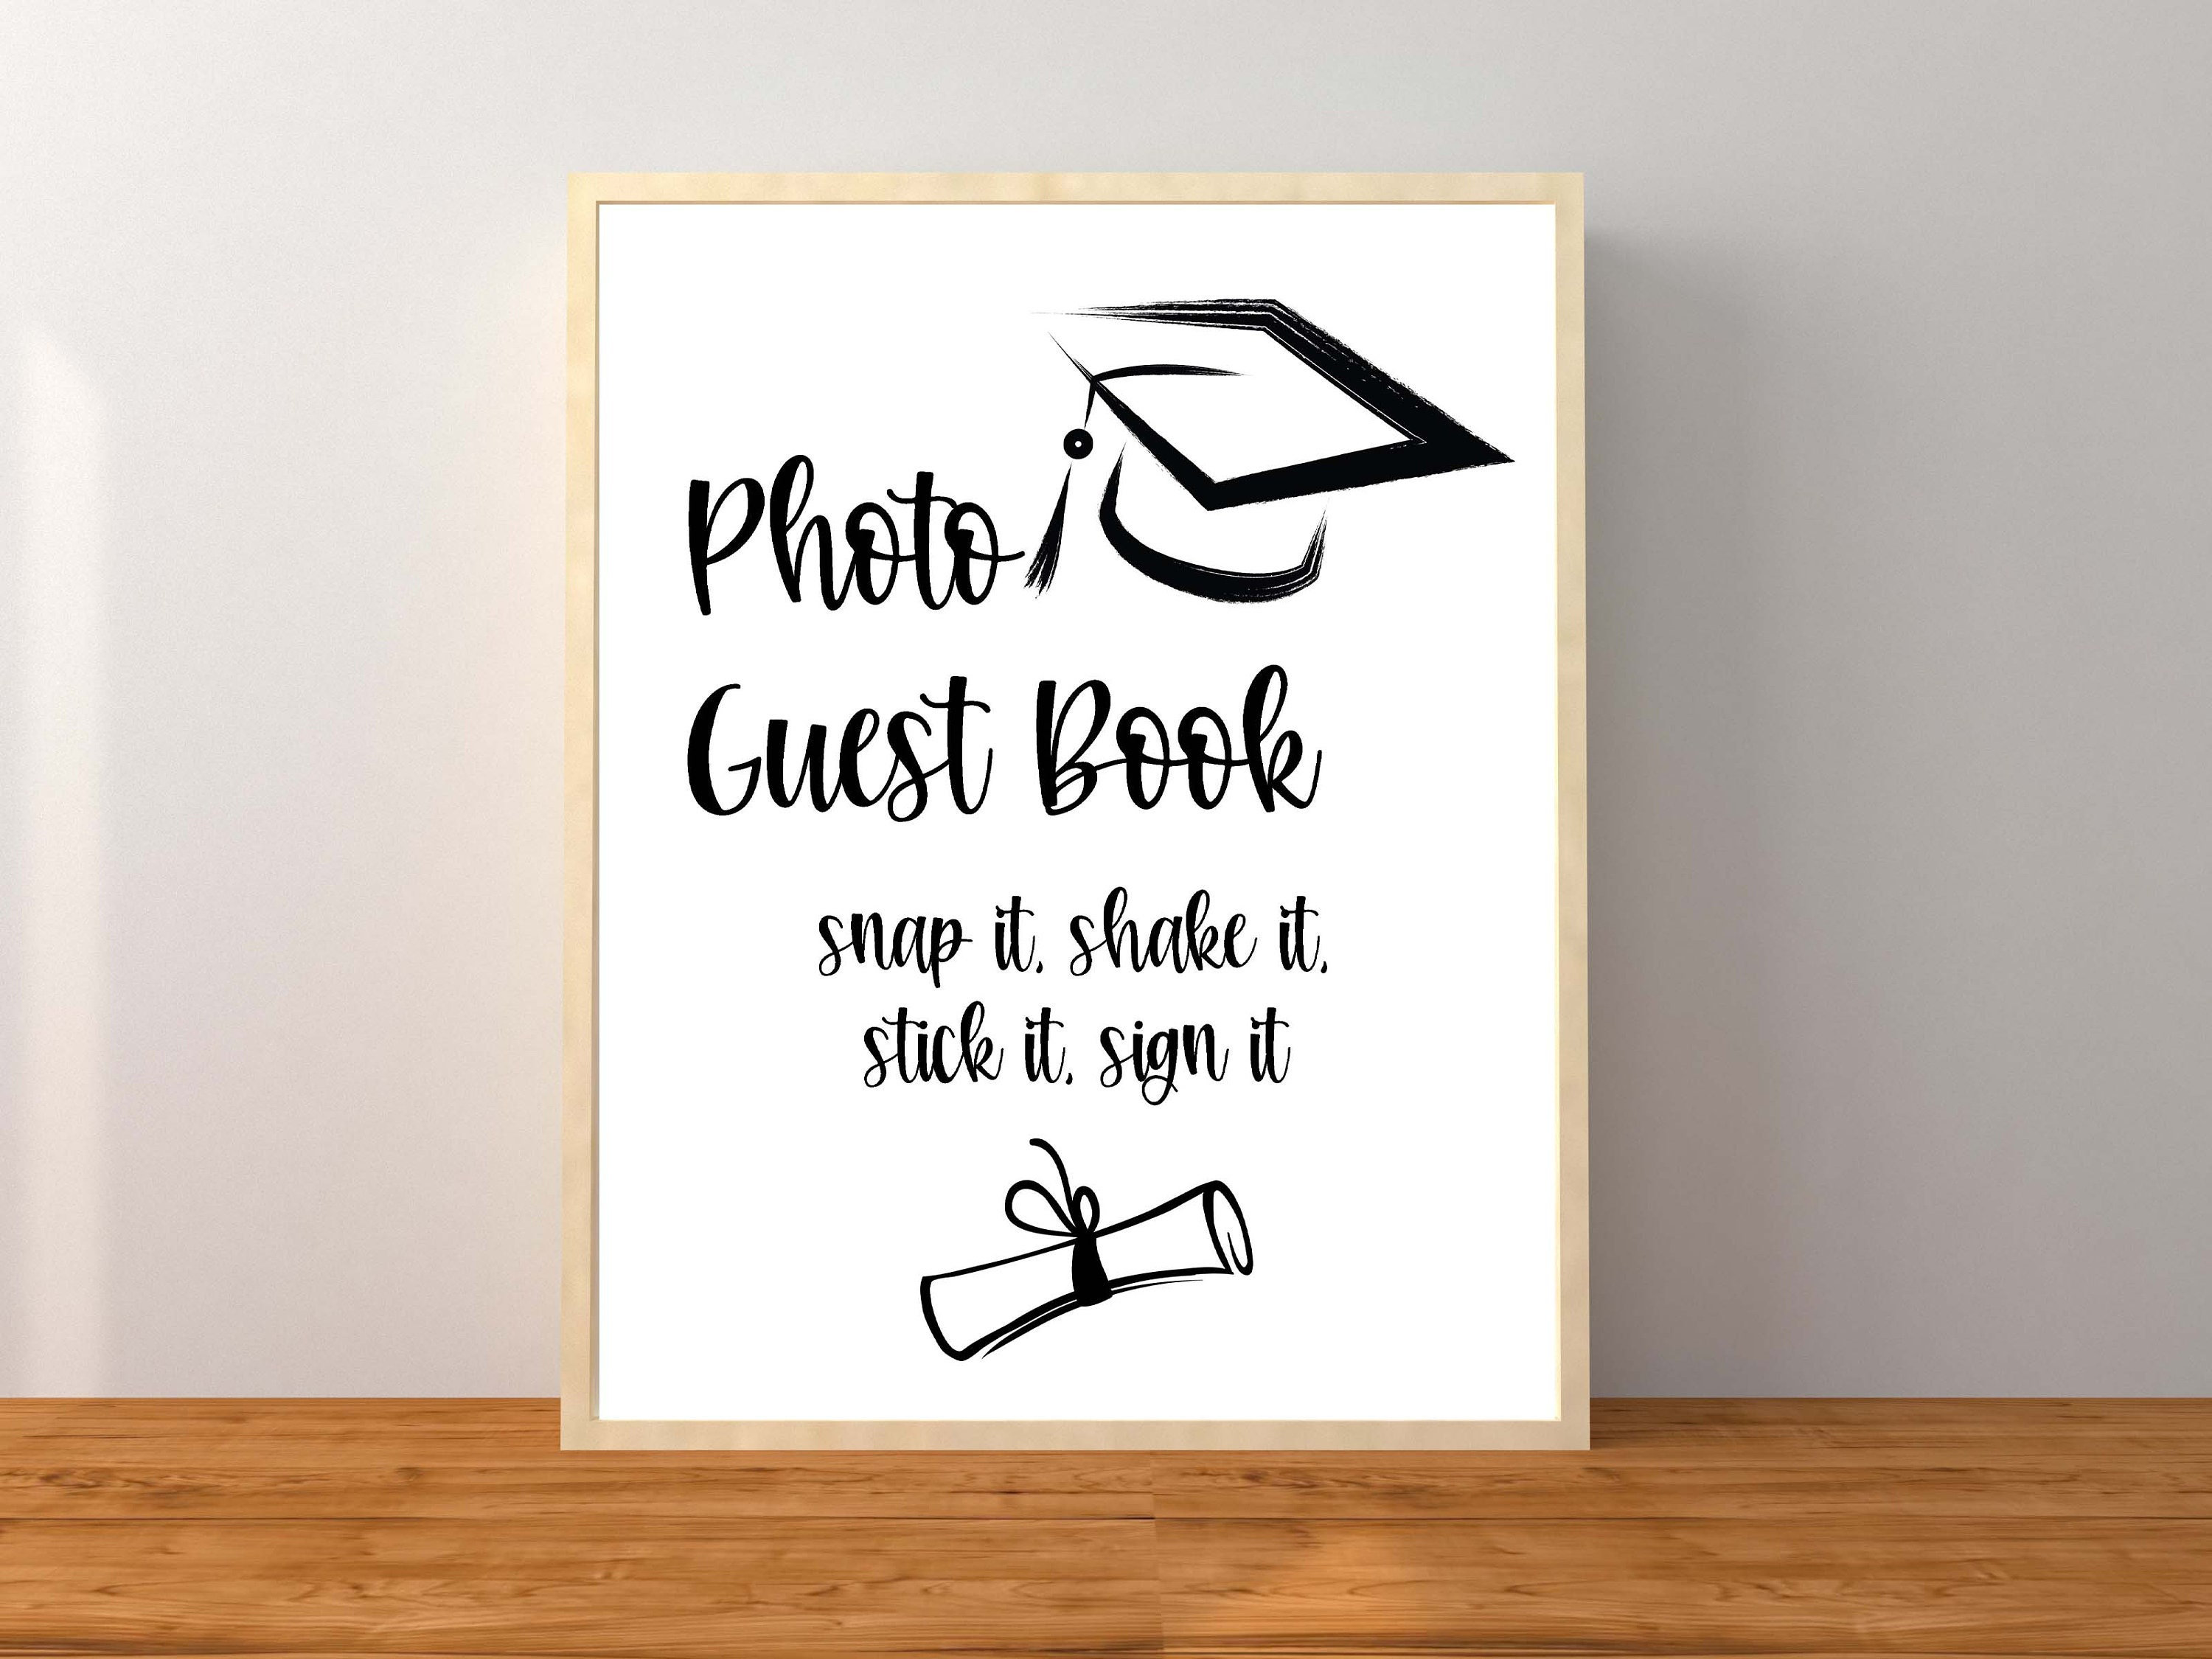 KIJETA Polaroid Guest Book for Wedding, Baby Shower, Birthday, Bridal Shower, Graduation Party, Anniversary - 11.5” x 8.5”, 80 Blank Pages Guestbook